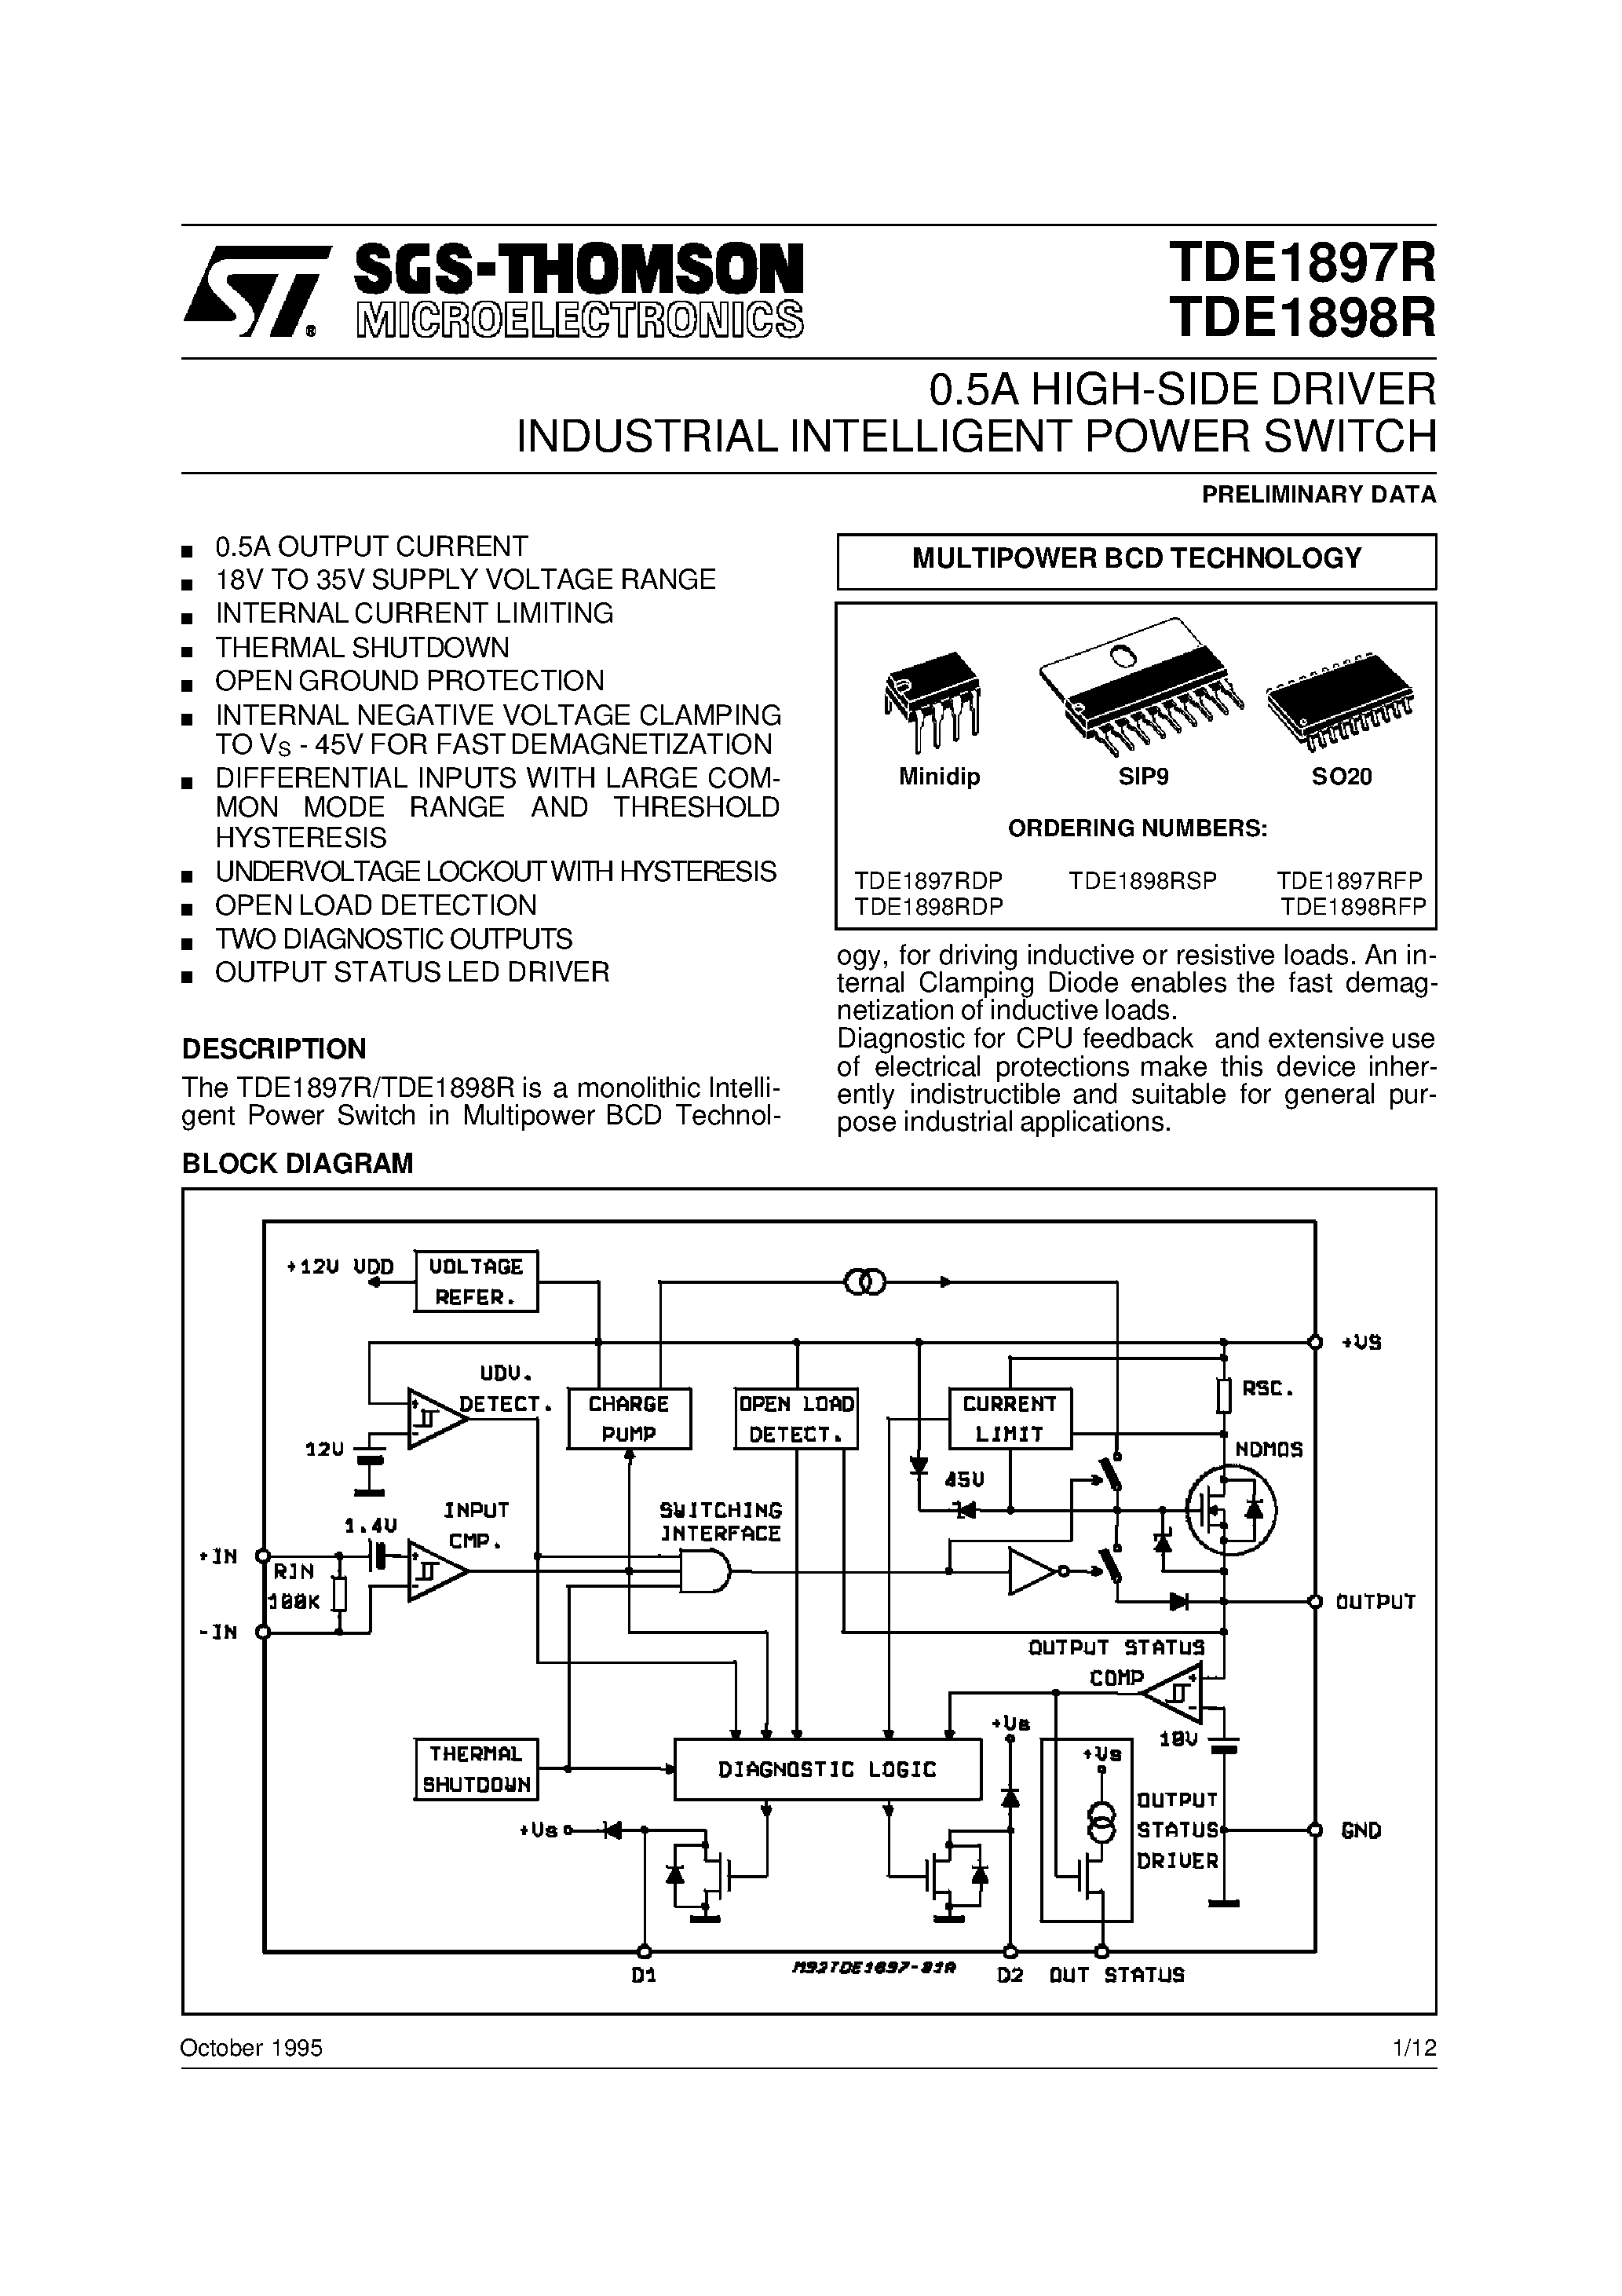 Datasheet TDE1898R - 0.5A HIGH-SIDE DRIVER INDUSTRIAL INTELLIGENT POWER SWITCH page 1